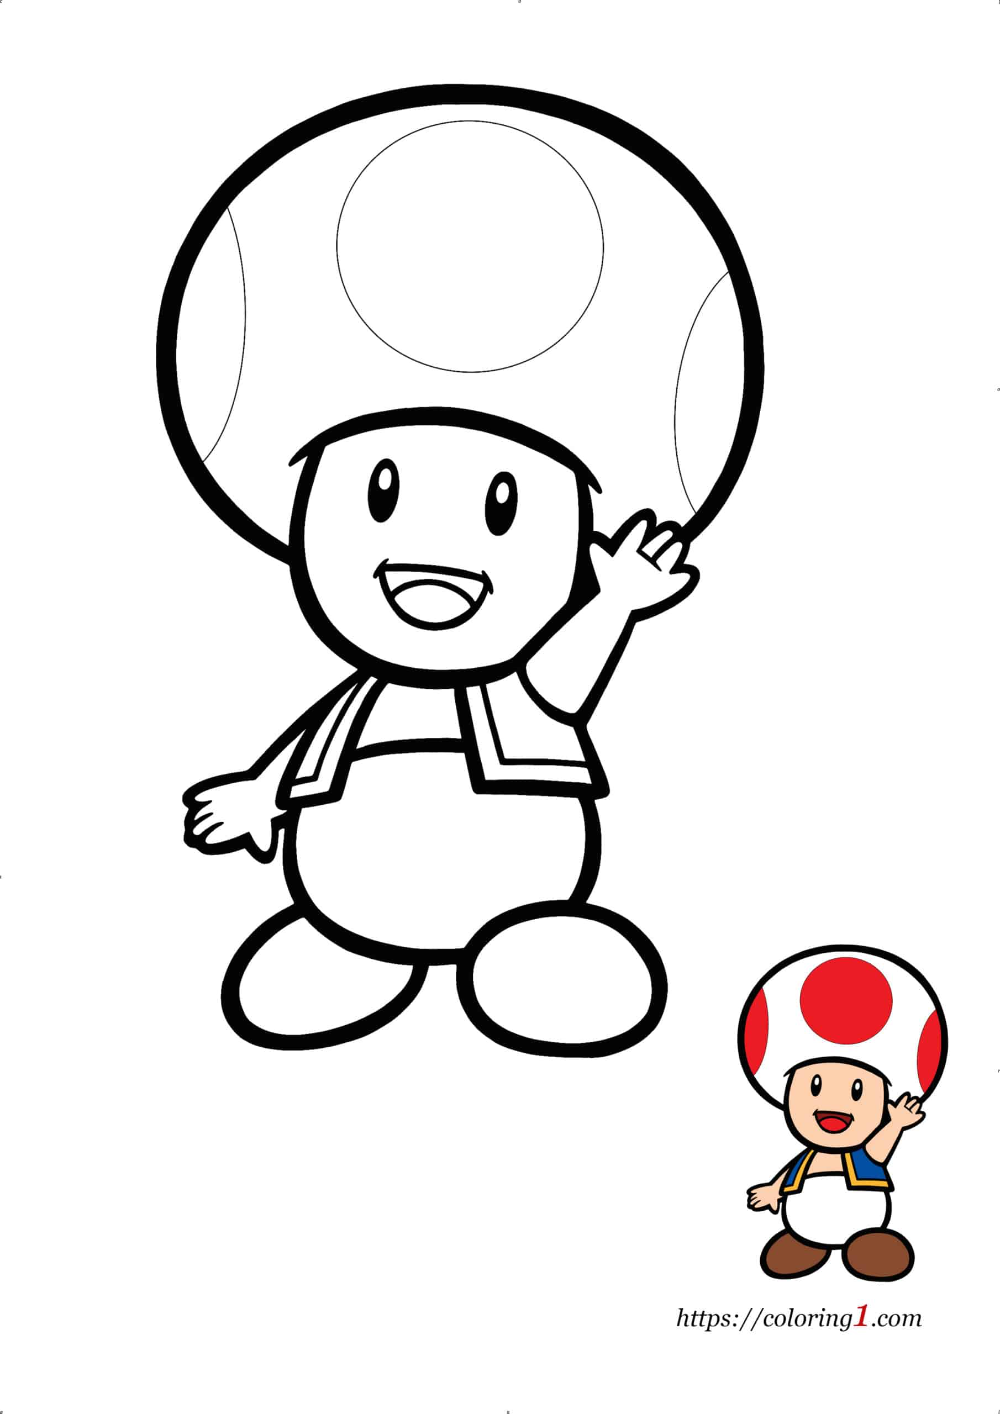 Toad Mario Coloring Pages - 2 Free Coloring Sheets (2021) | Mario coloring  pages, Super mario coloring pages, Mini canvas art